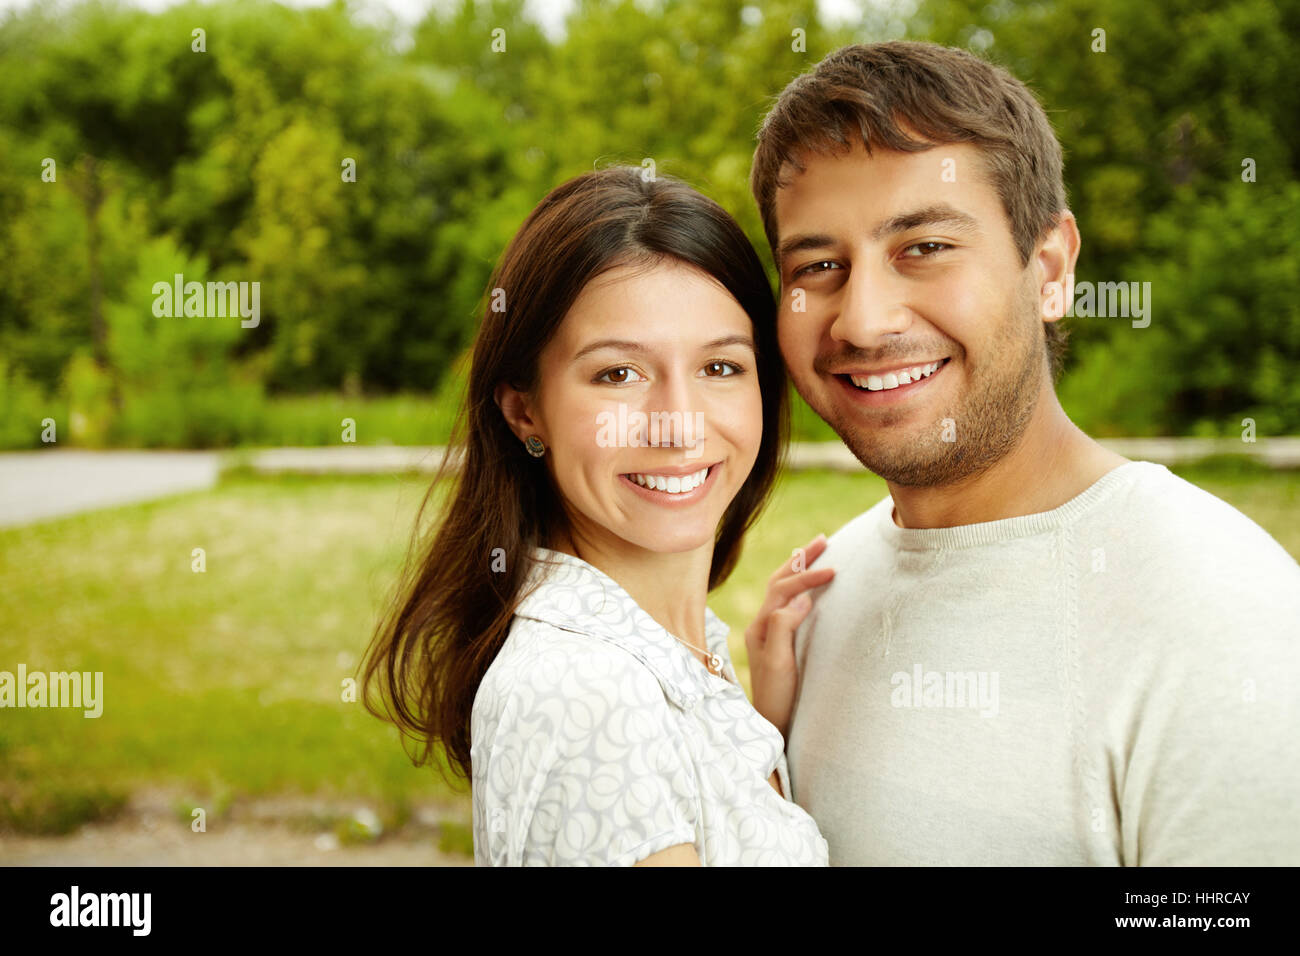 guy, woman, humans, human beings, people, folk, persons, human, human being, Stock Photo